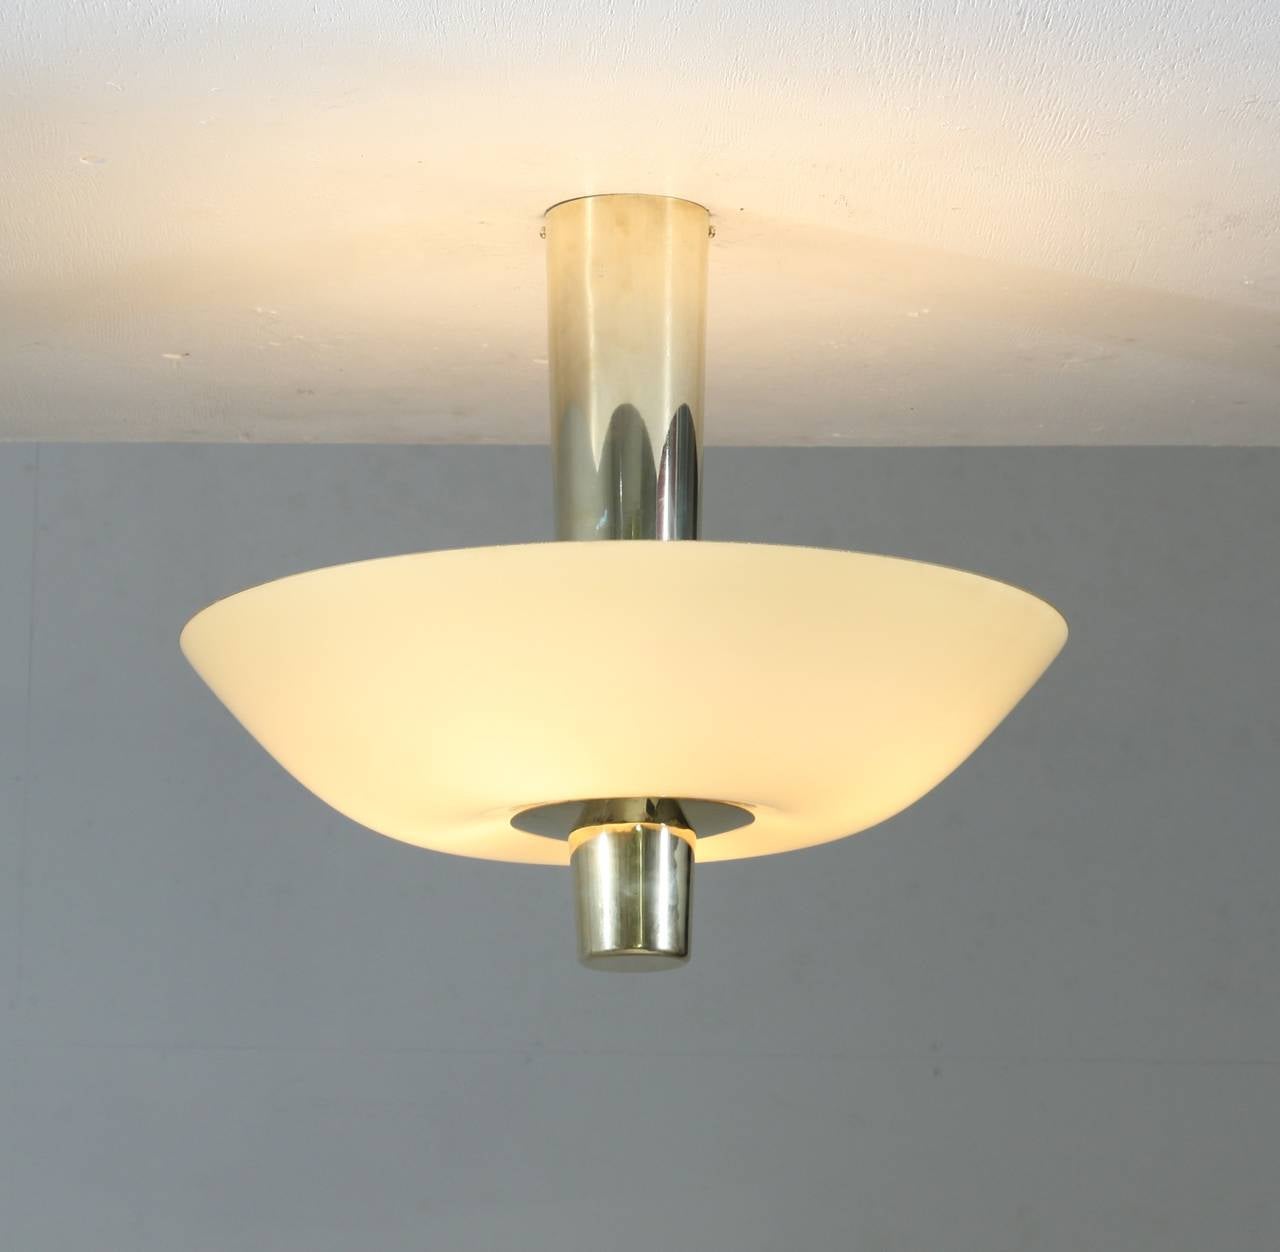 A Paavo Tynell model 9053 ceiling lamp for Idman with a long brass cylindrical stem holding four lamps inside the light yellow shade.
The chandelier is in perfect condition and matches very well with the other 9053 Tynell flush mount in our